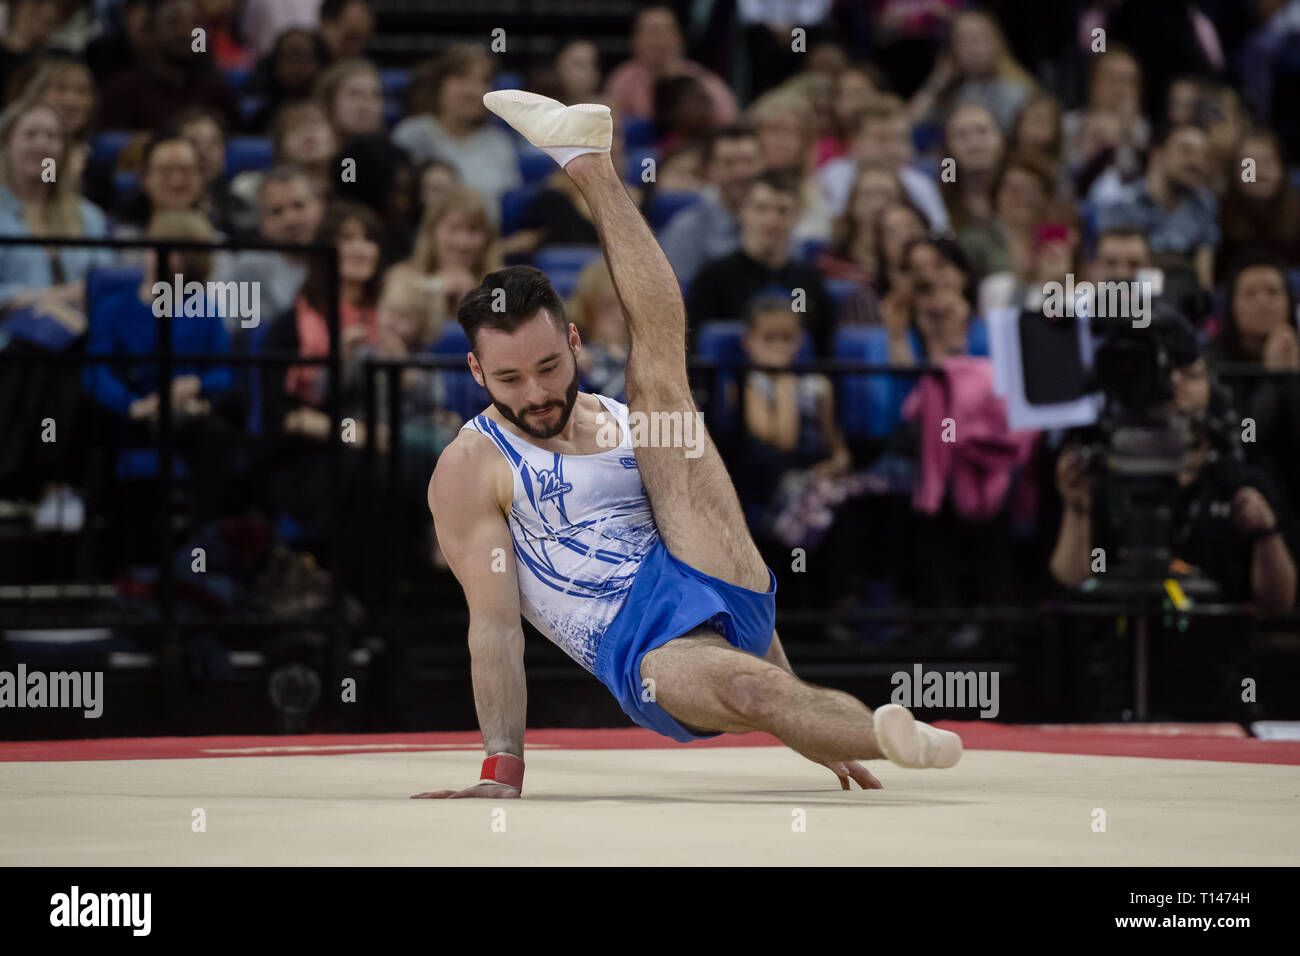 London, UK. 23rd March, 2019. James Hall performs Floor Exercise during the Matchroom Multisport presents the 2019 Superstars of Gymnastics at The O2 Arena on Saturday, 23 March 2019. LONDON ENGLAND. Credit: Taka G Wu/Alamy News Stock Photo